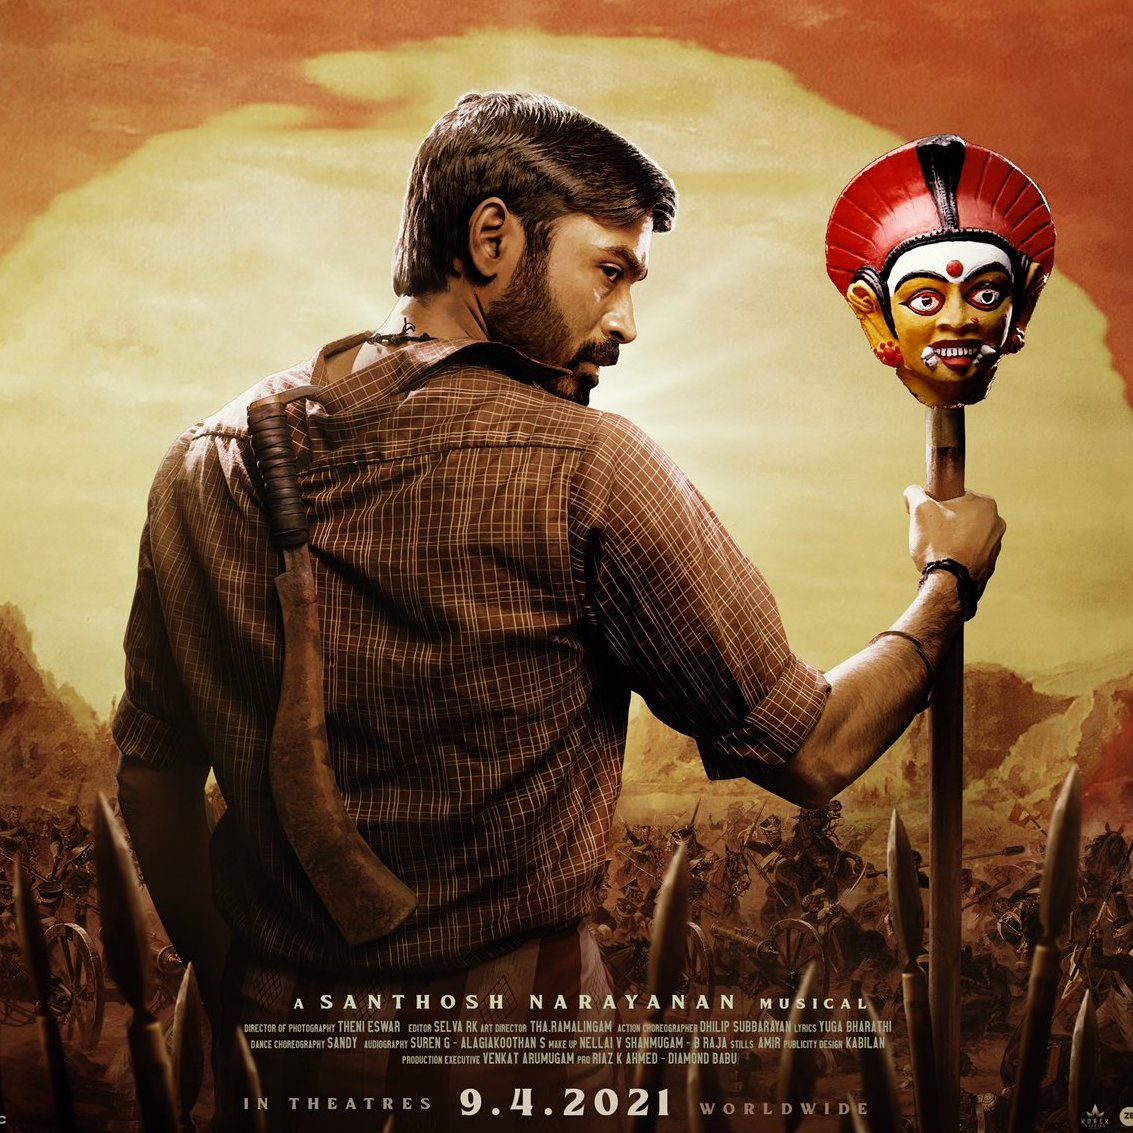 Dhanush's film becomes the only Indian film to be chosen internationally by the New York Times, Karnan